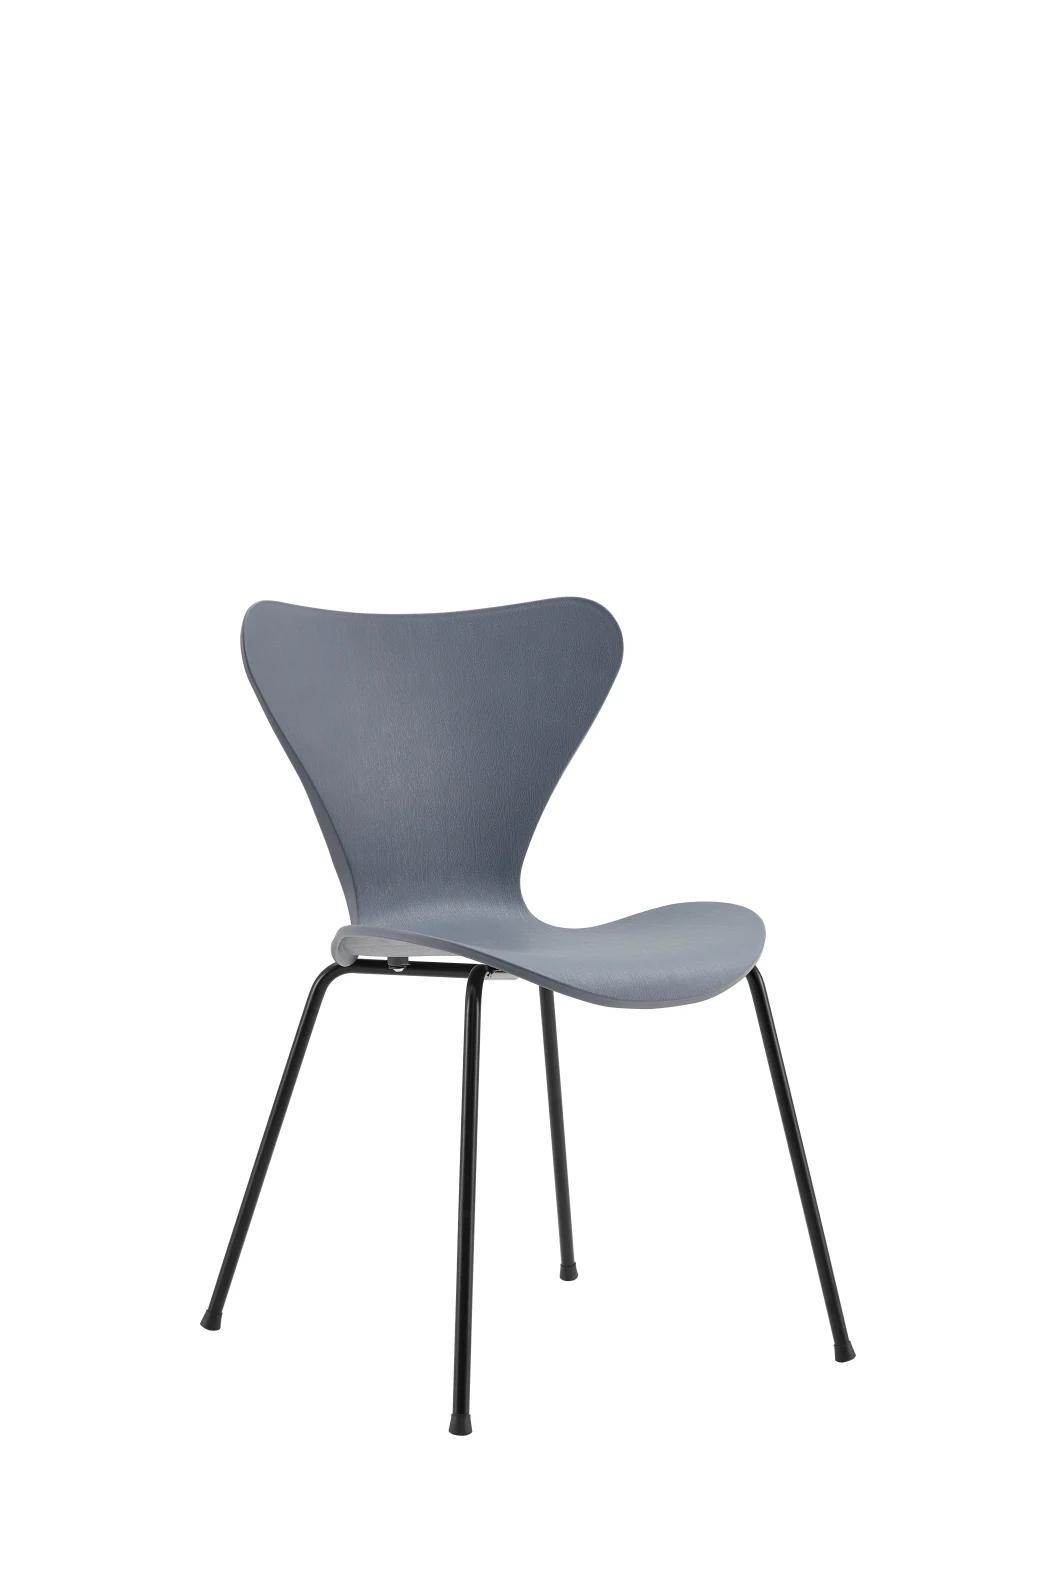 Dining Chairs Side Chair Modern Stylish PP Plastic Seat with Metal Legs MID Century Modern Chair for Living Room, Dining Room, Bedroom, Kitchen